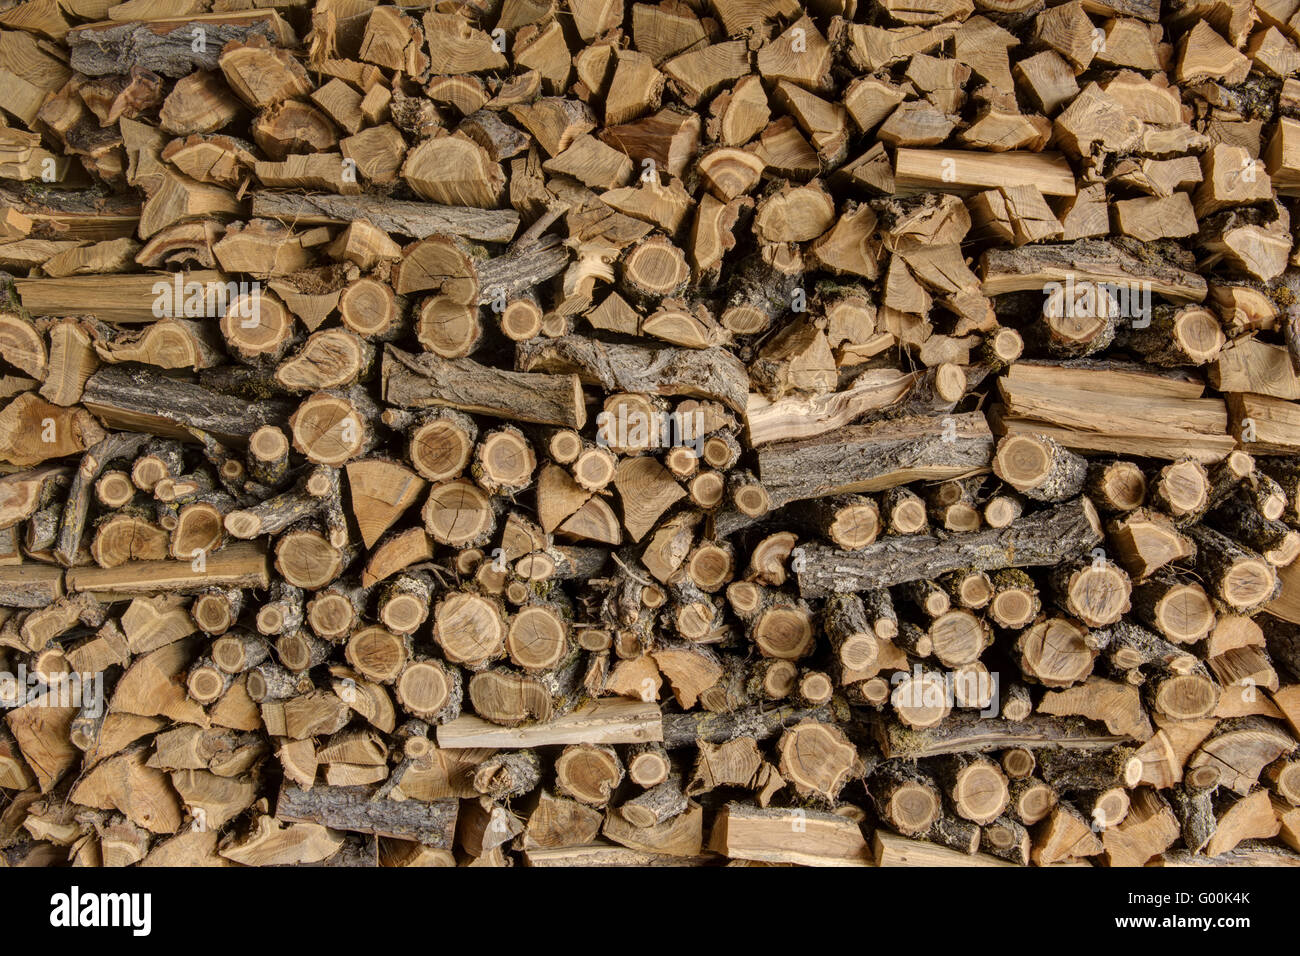 Pile of wood cut for fireplace Stock Photo